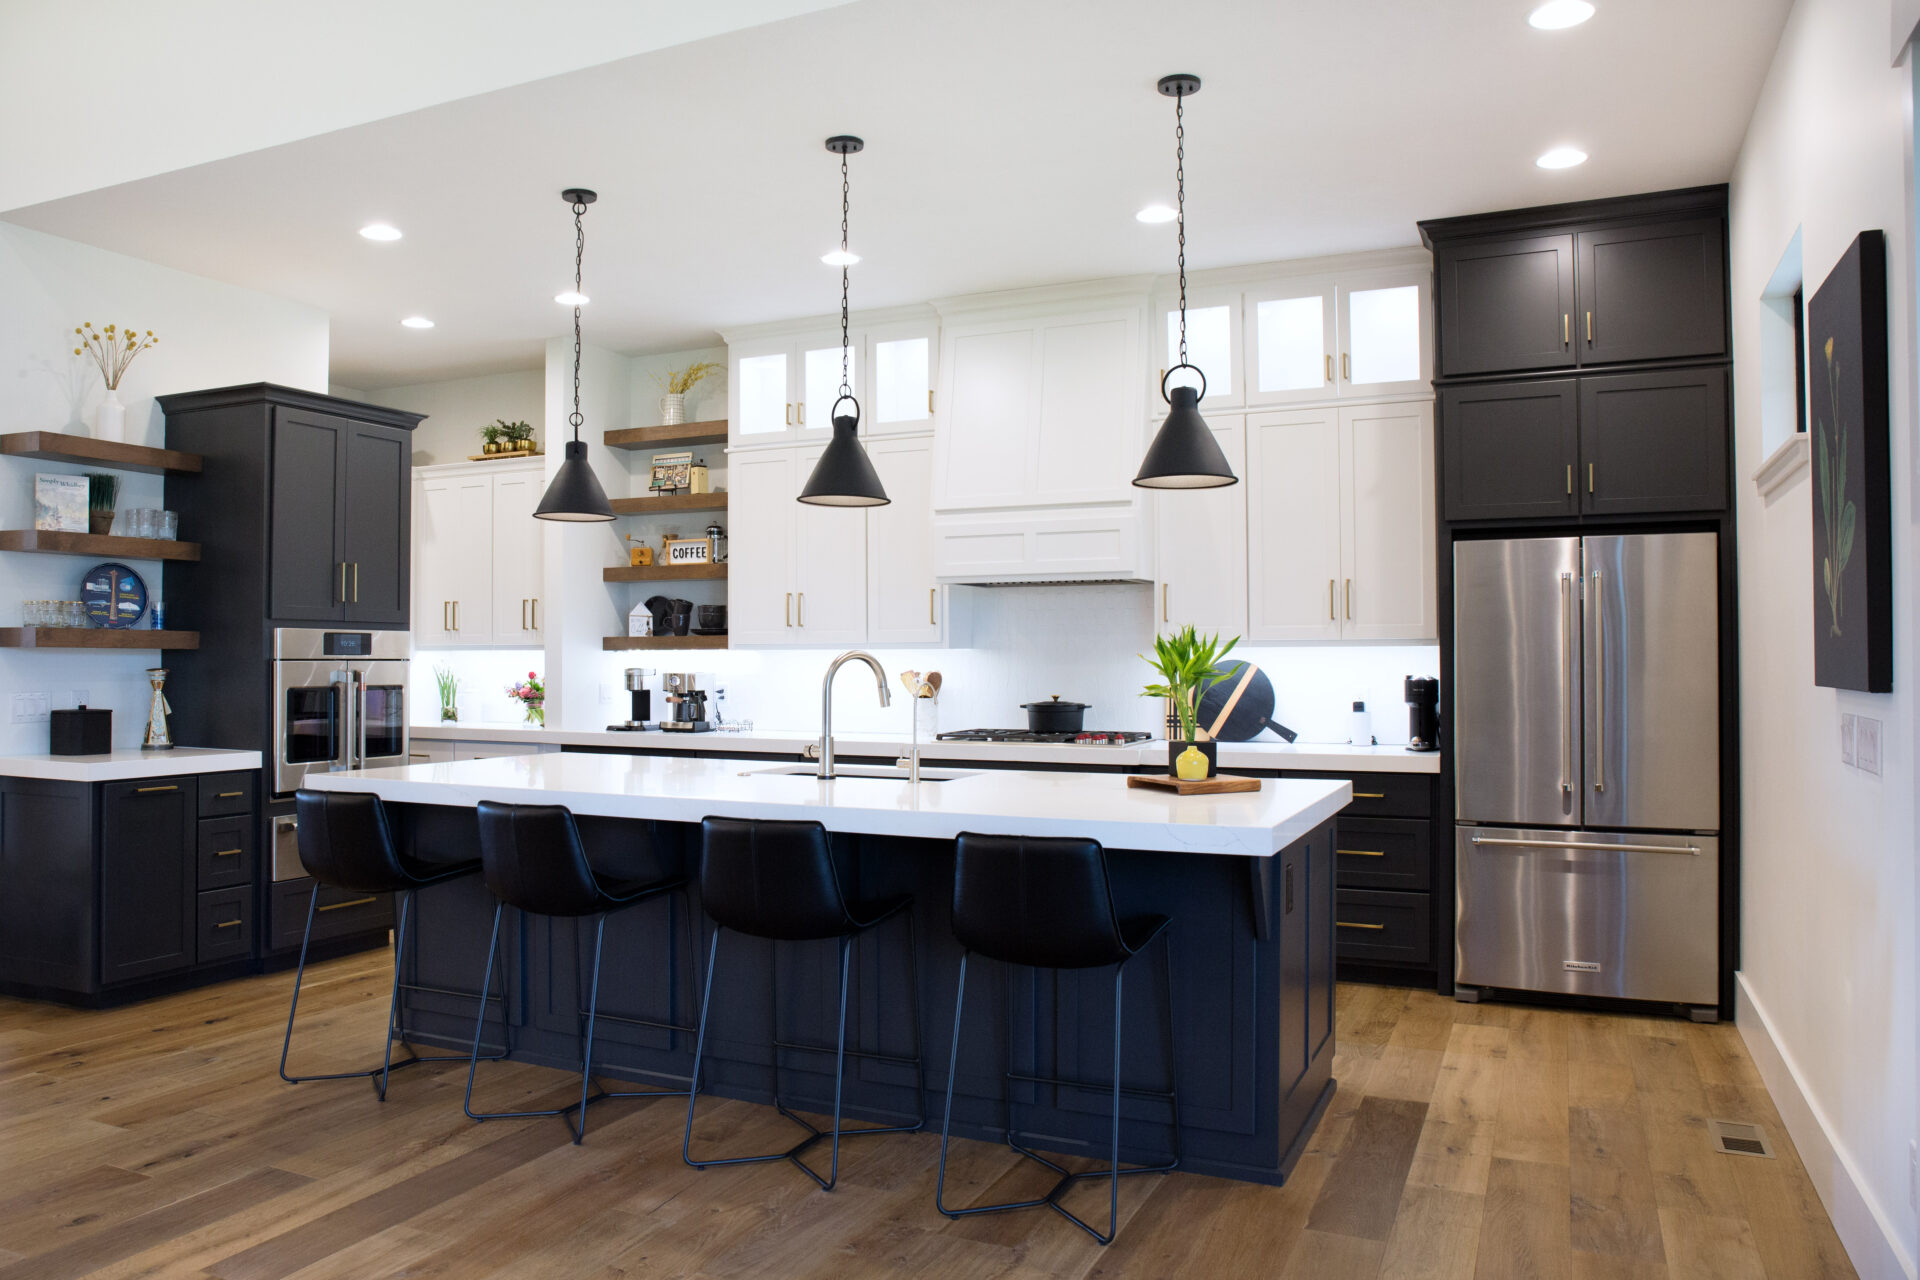 A spacious kitchen with black and white cabinets